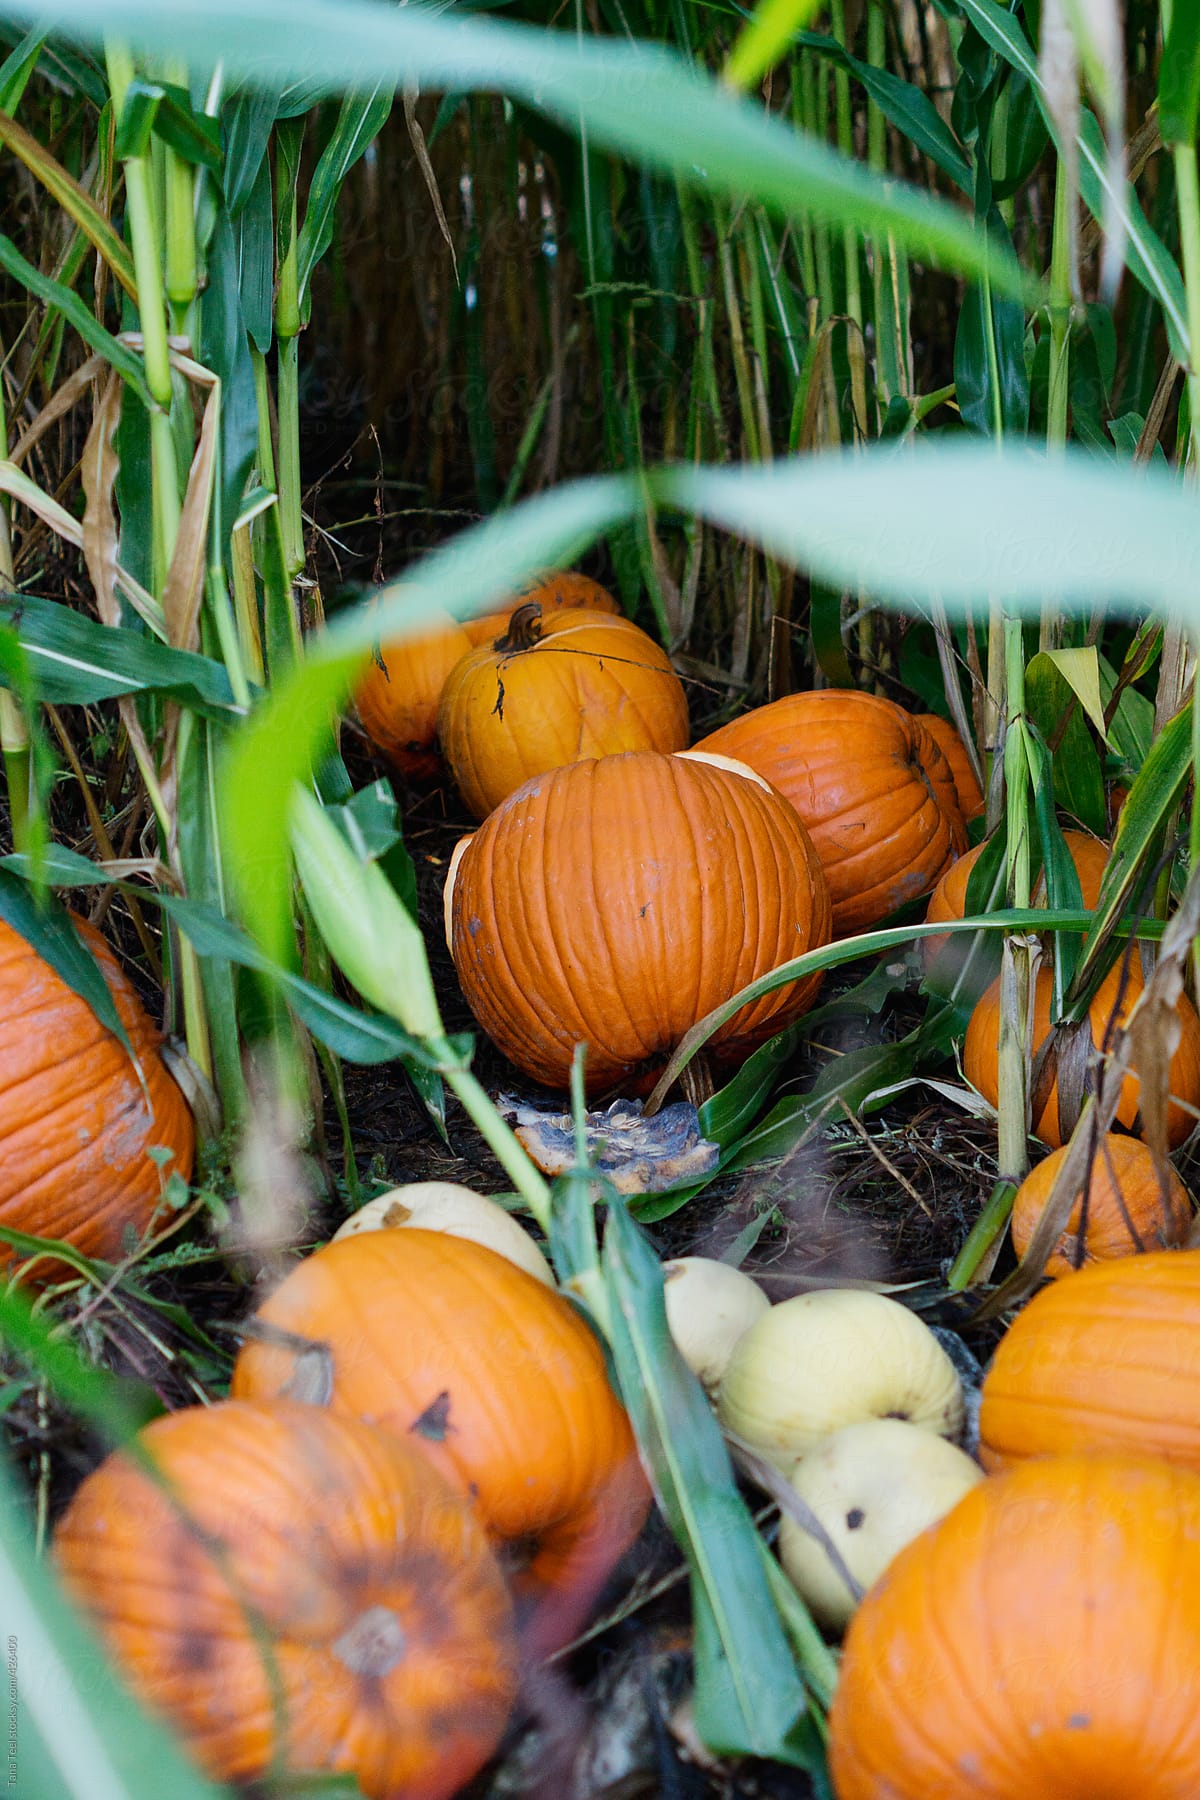 Pumpkins gathered together among corn in a corn field